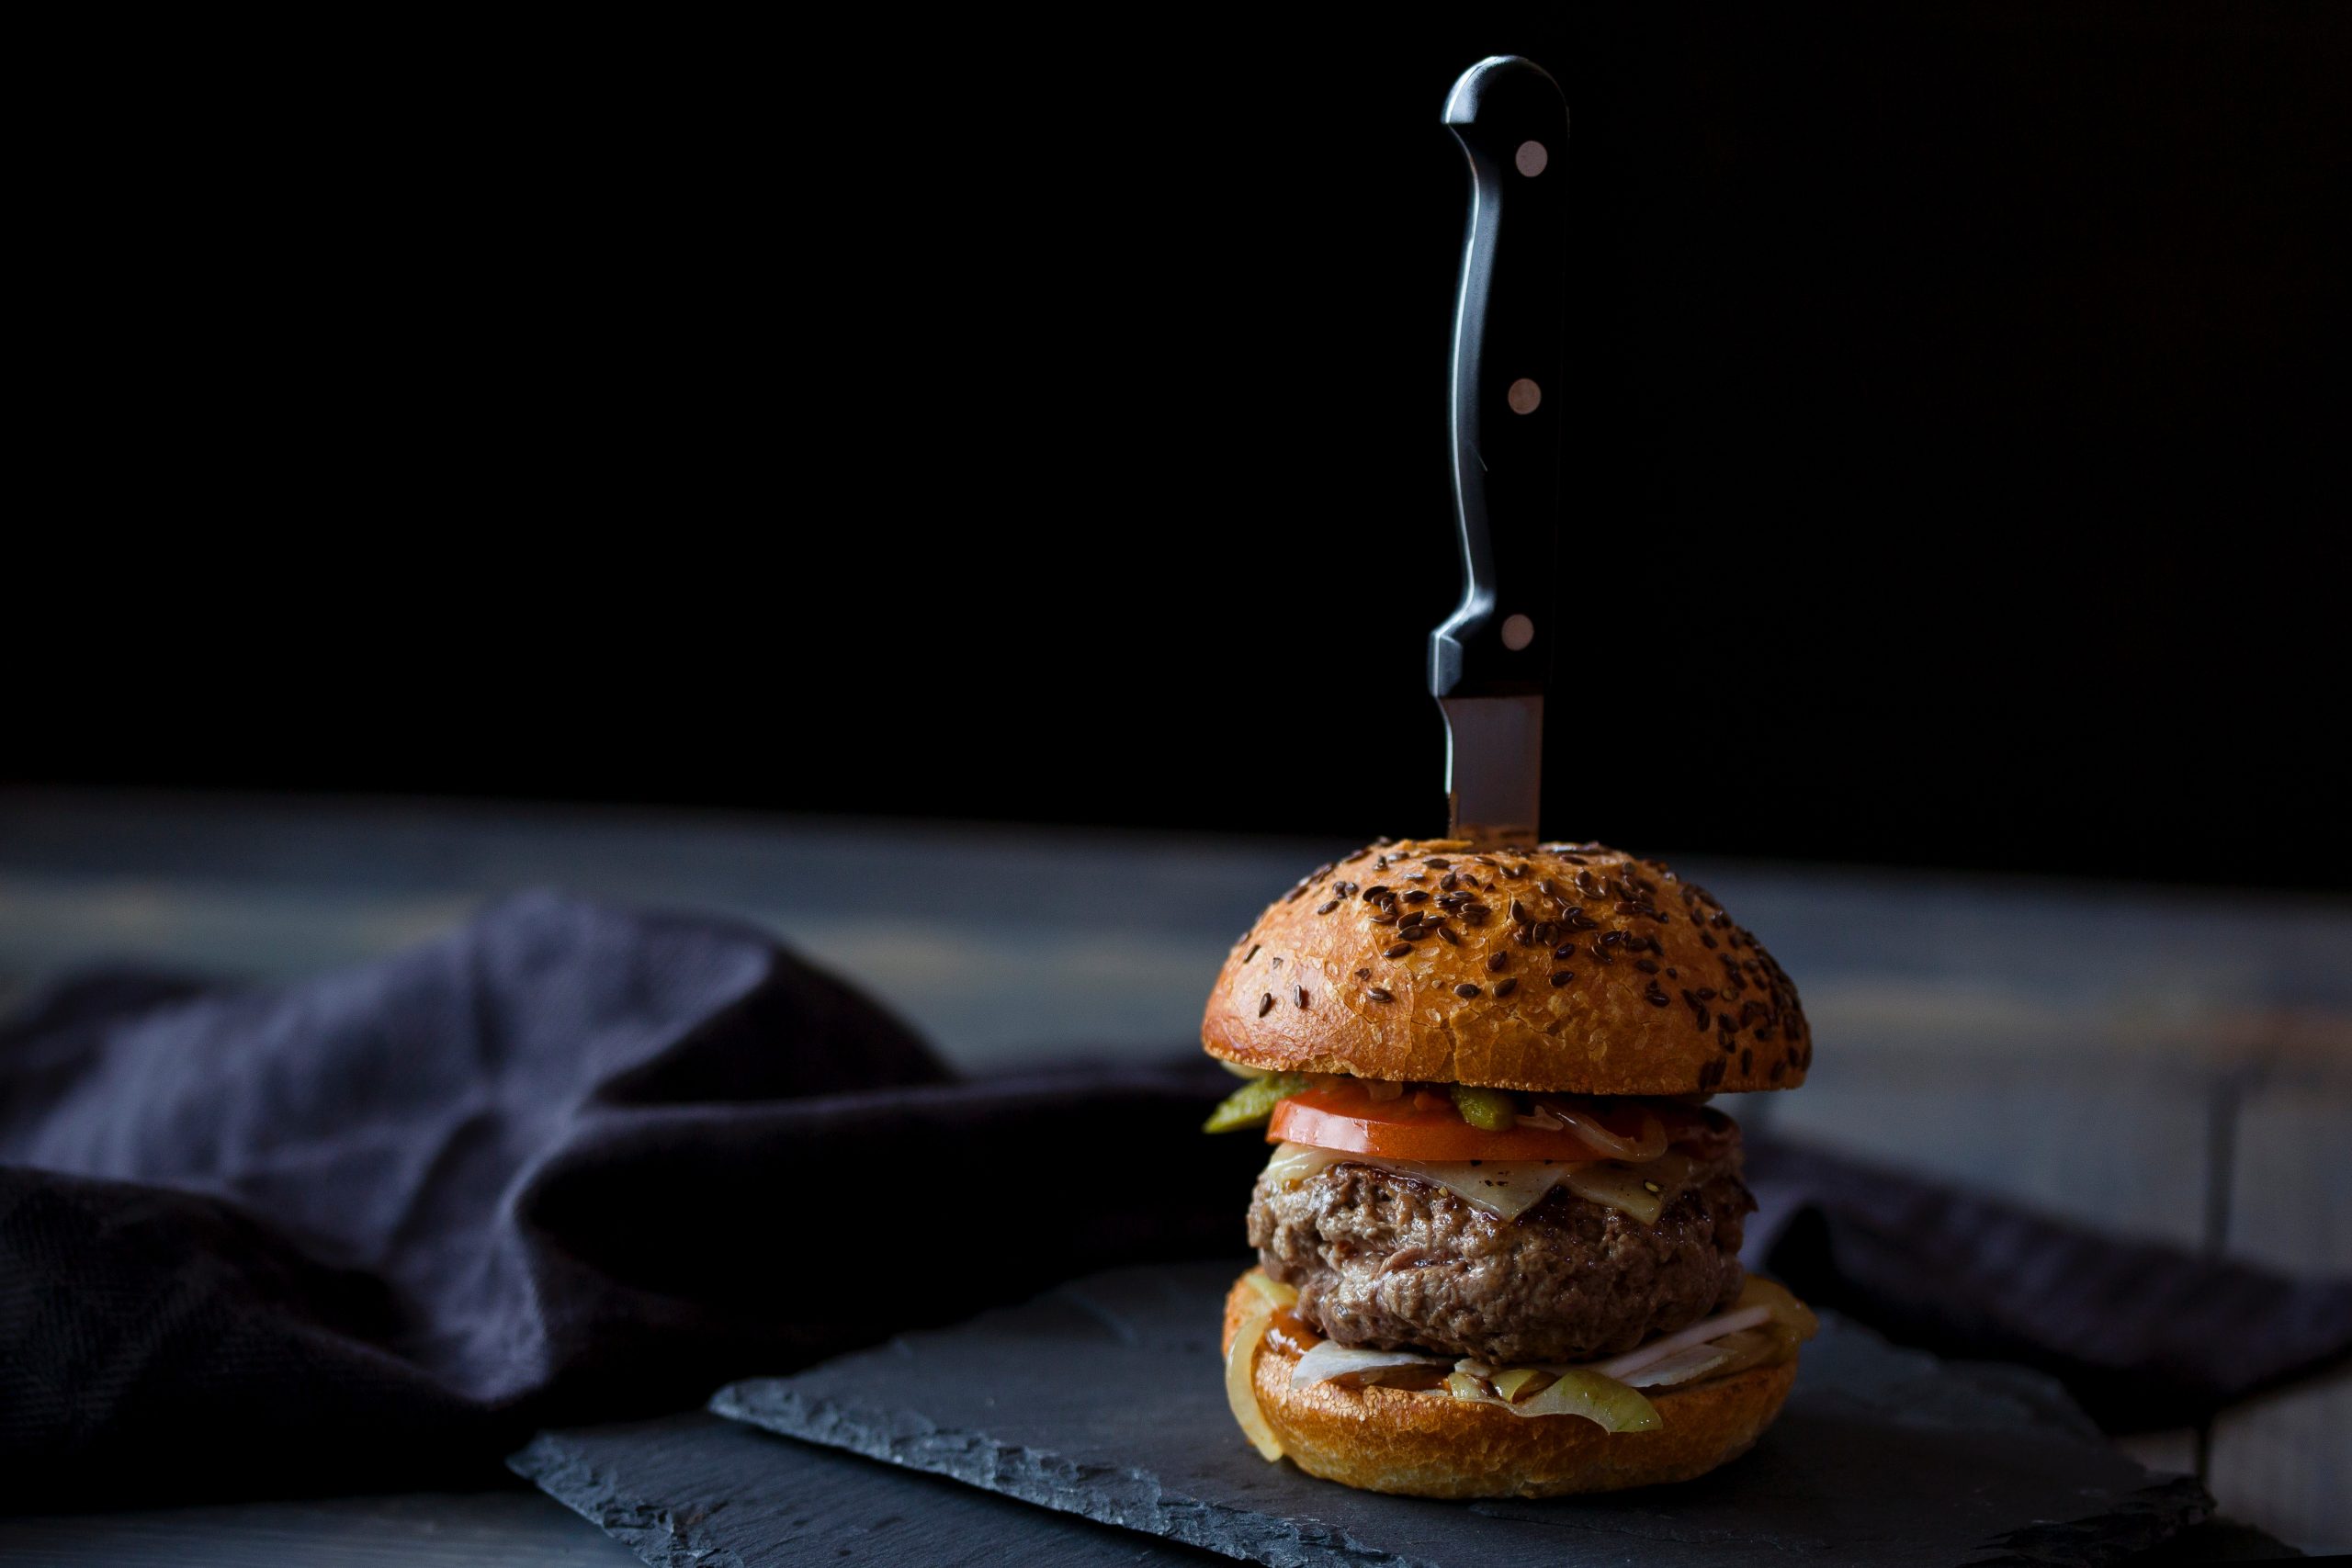 wallpaper Burger skewered with knife near black textile